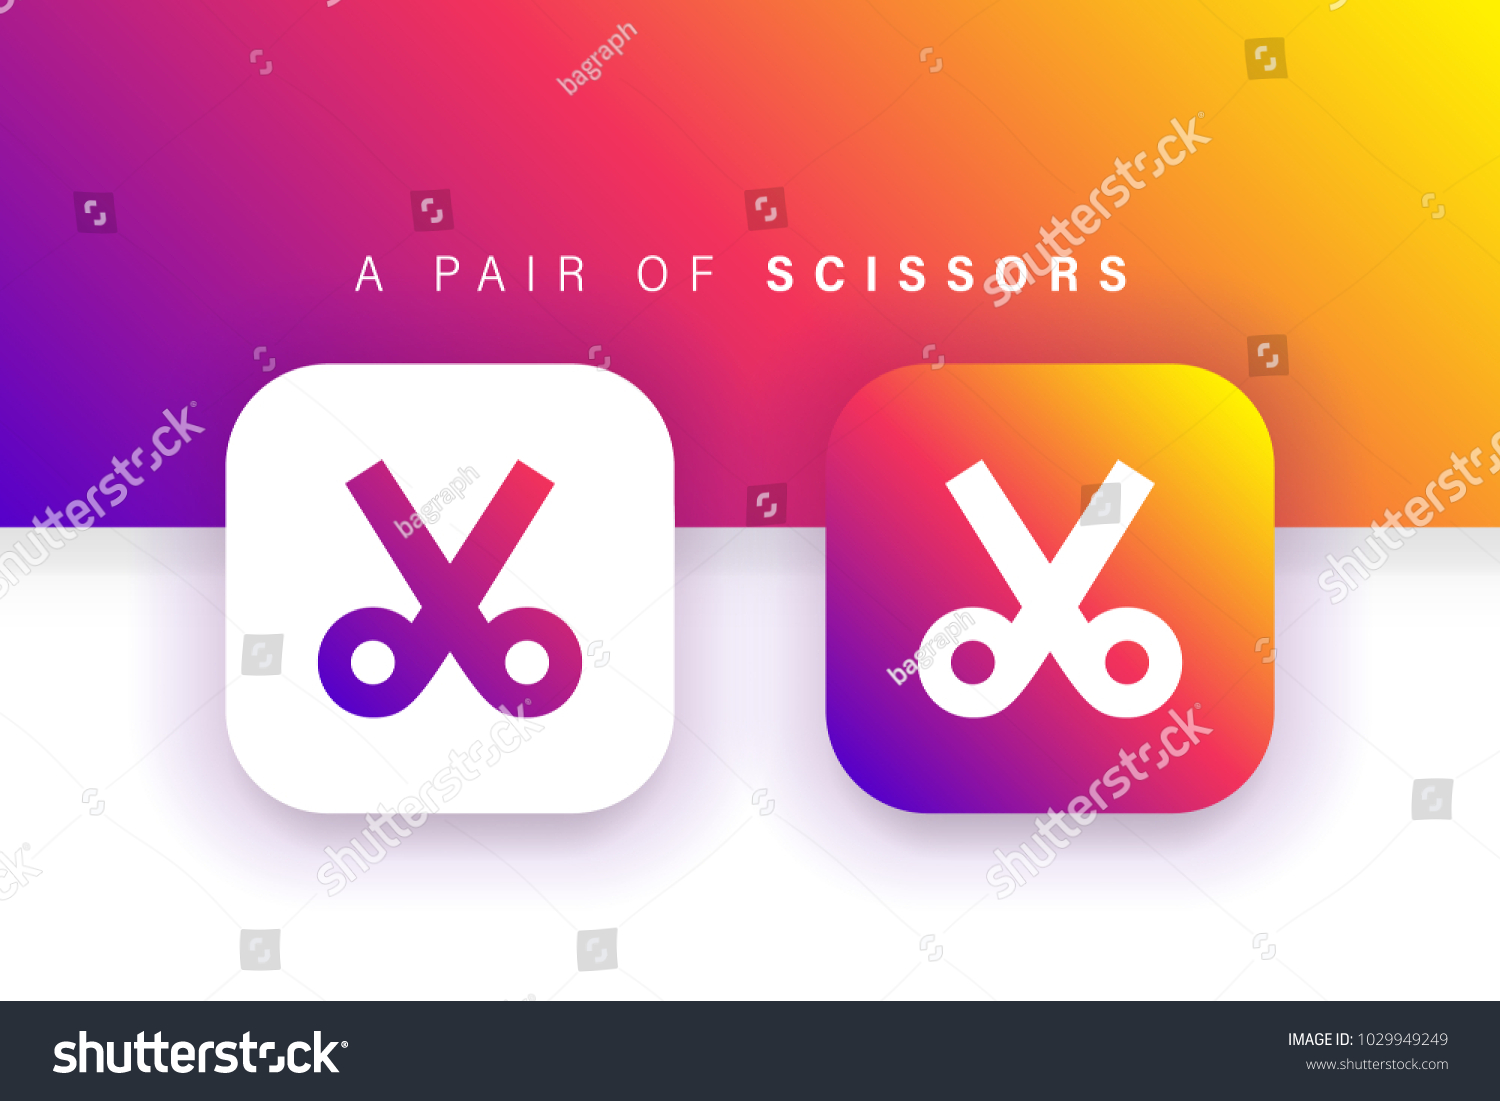 SVG of Scissors icon. Cut icon. Trim icon. Square contained. Use for brand logo, application, ux/ui, web. Colorful design. Compatible with jpg, png, eps, ai, cdr, svg, pdf, ico, gif. svg